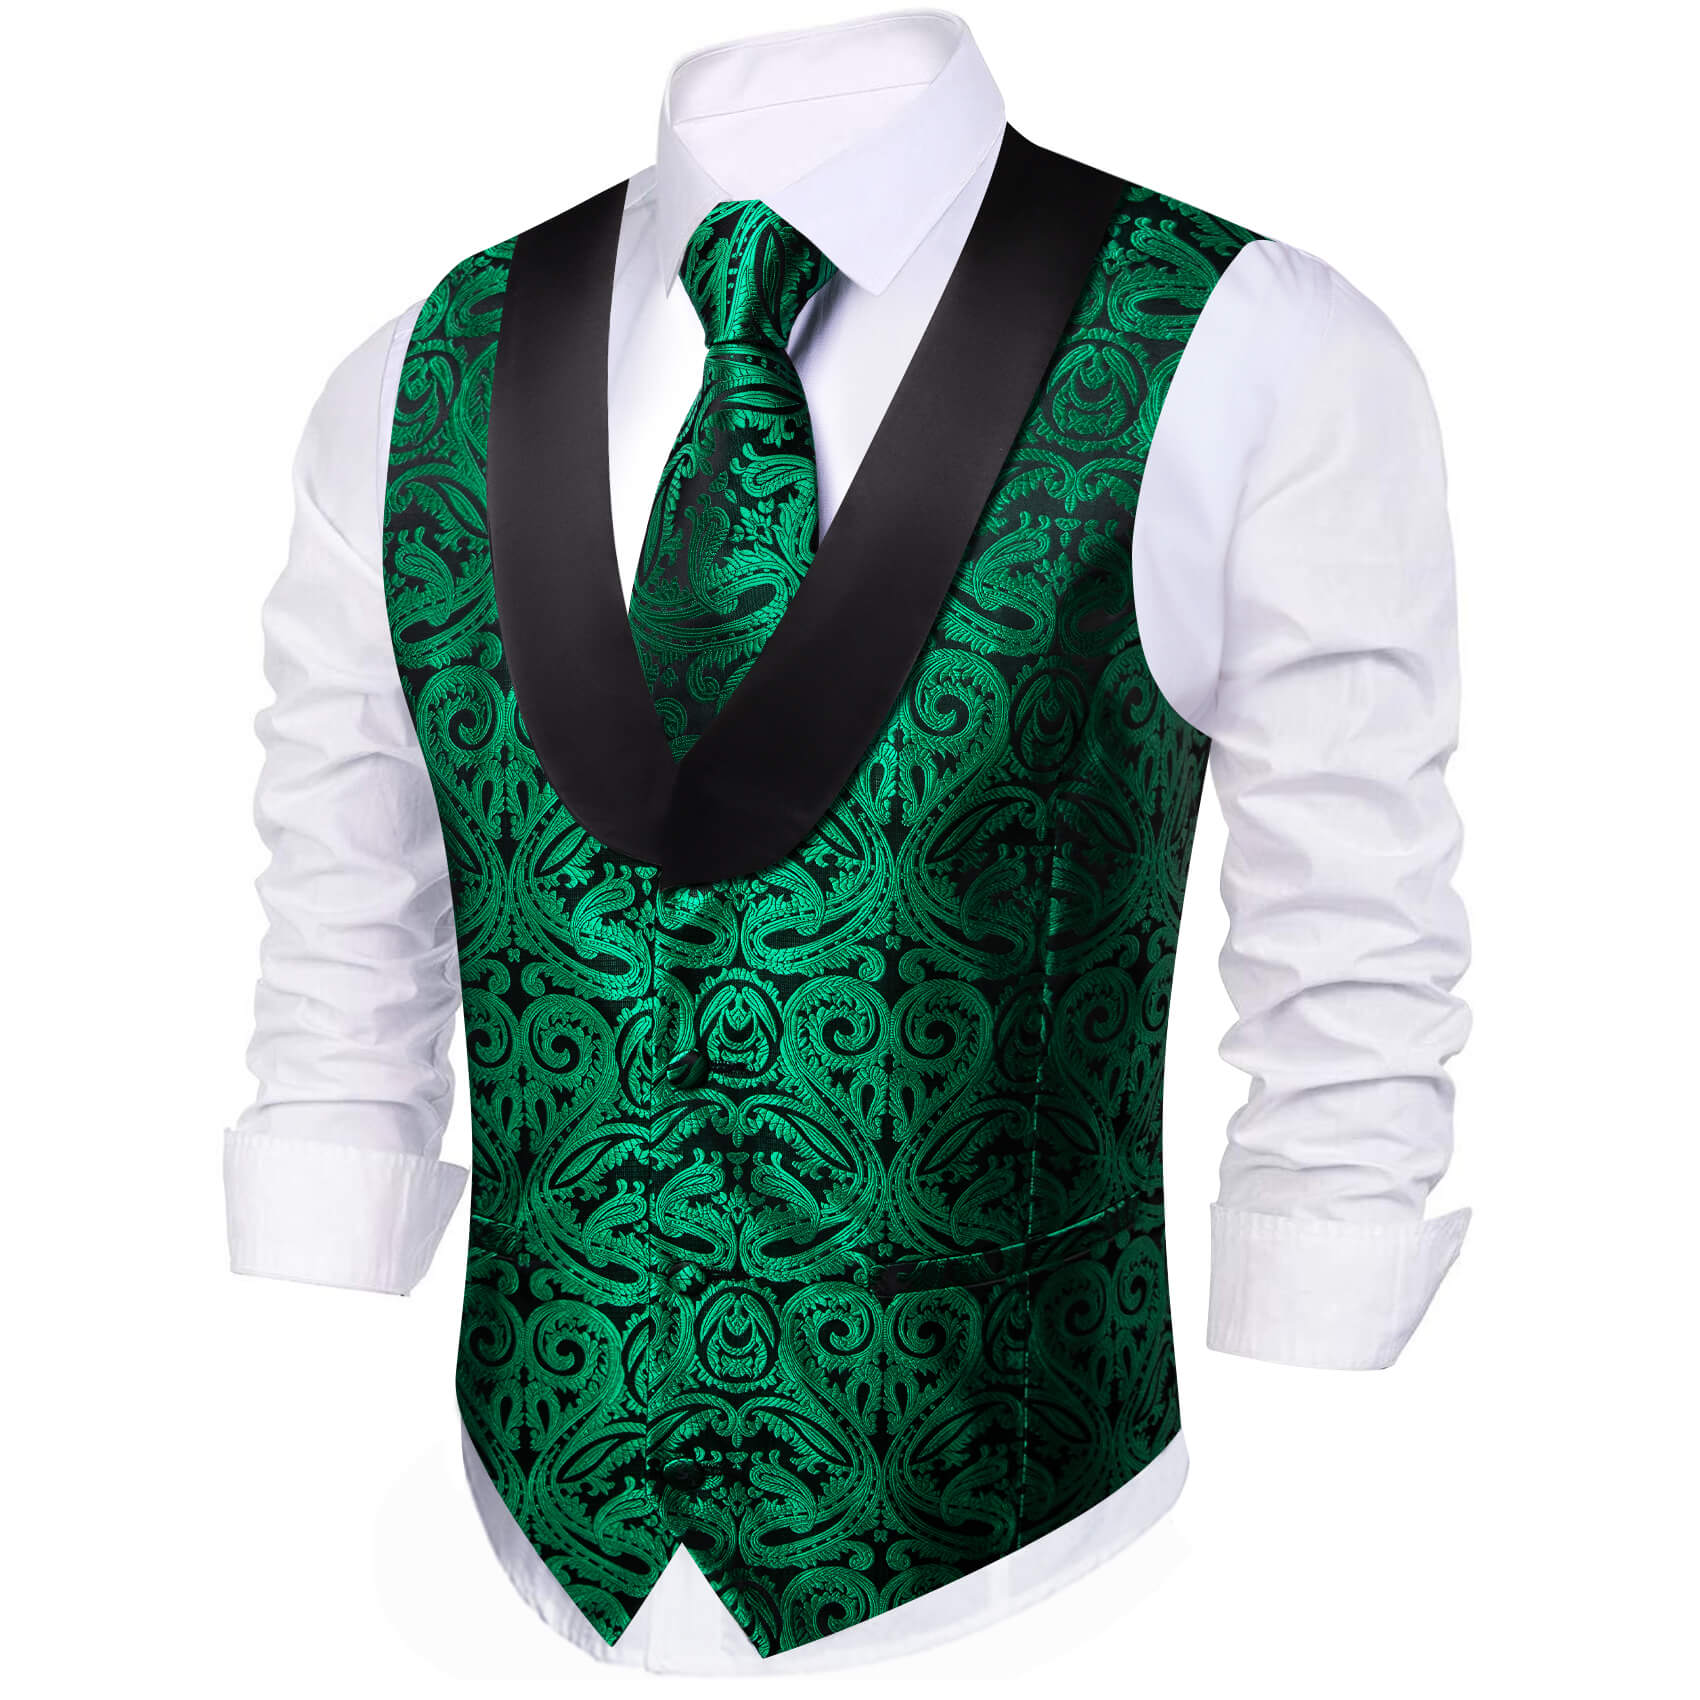  Shawl Collar Vest Forest Green Paisley Vest